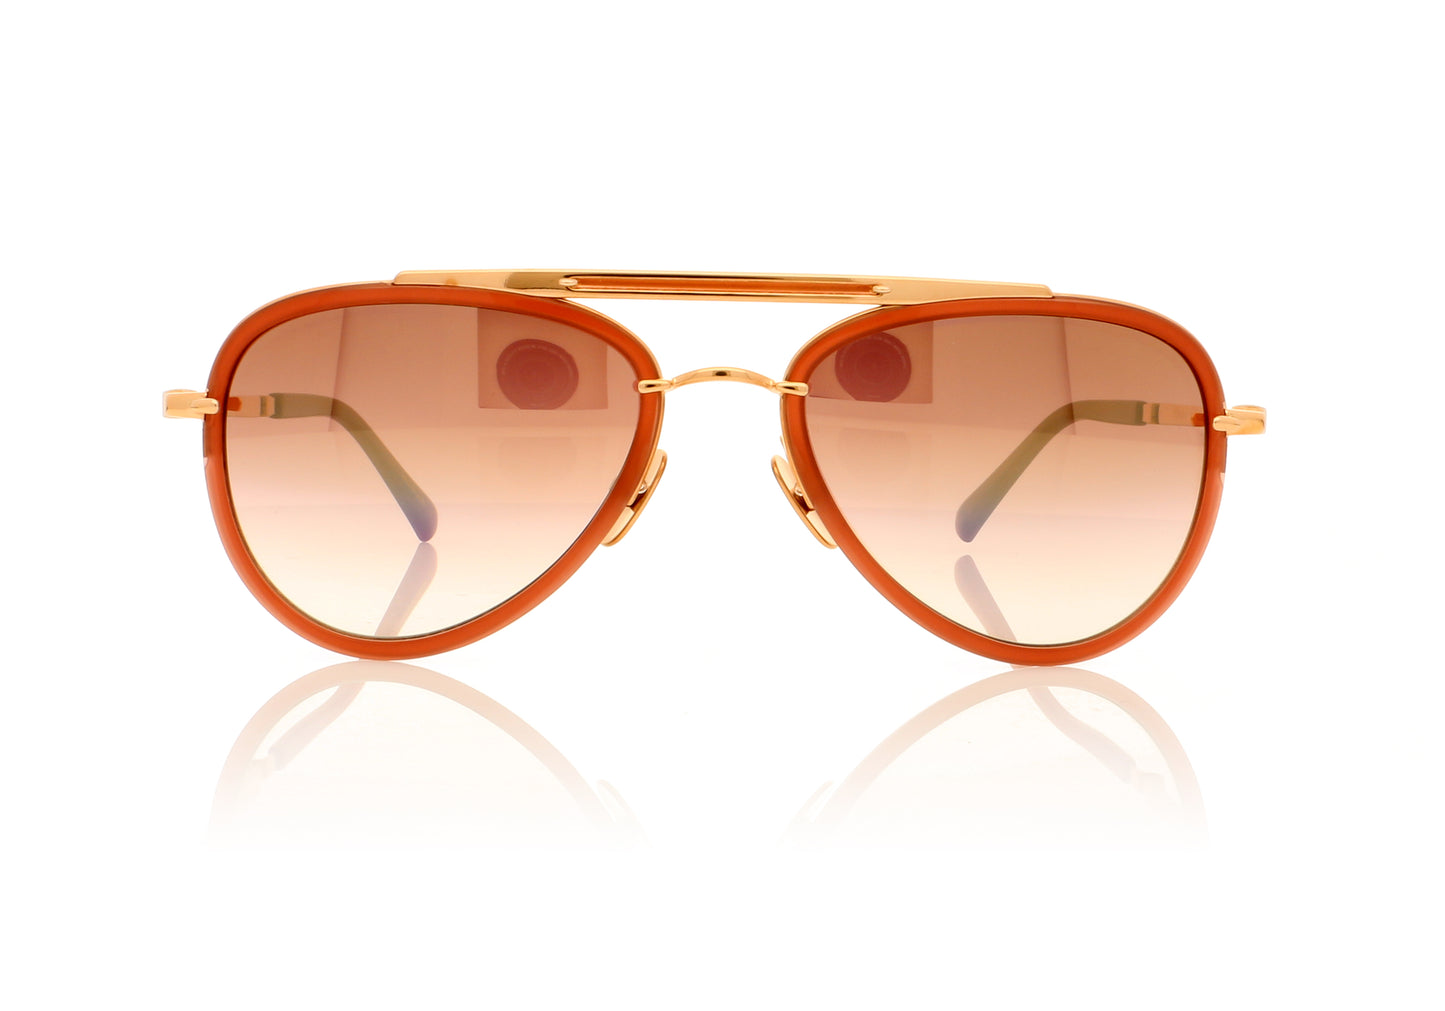 Mr. Leight Doheny SL 18KRG-RW/SU 18K Rose Gold - Rosewood Sunglasses - Front